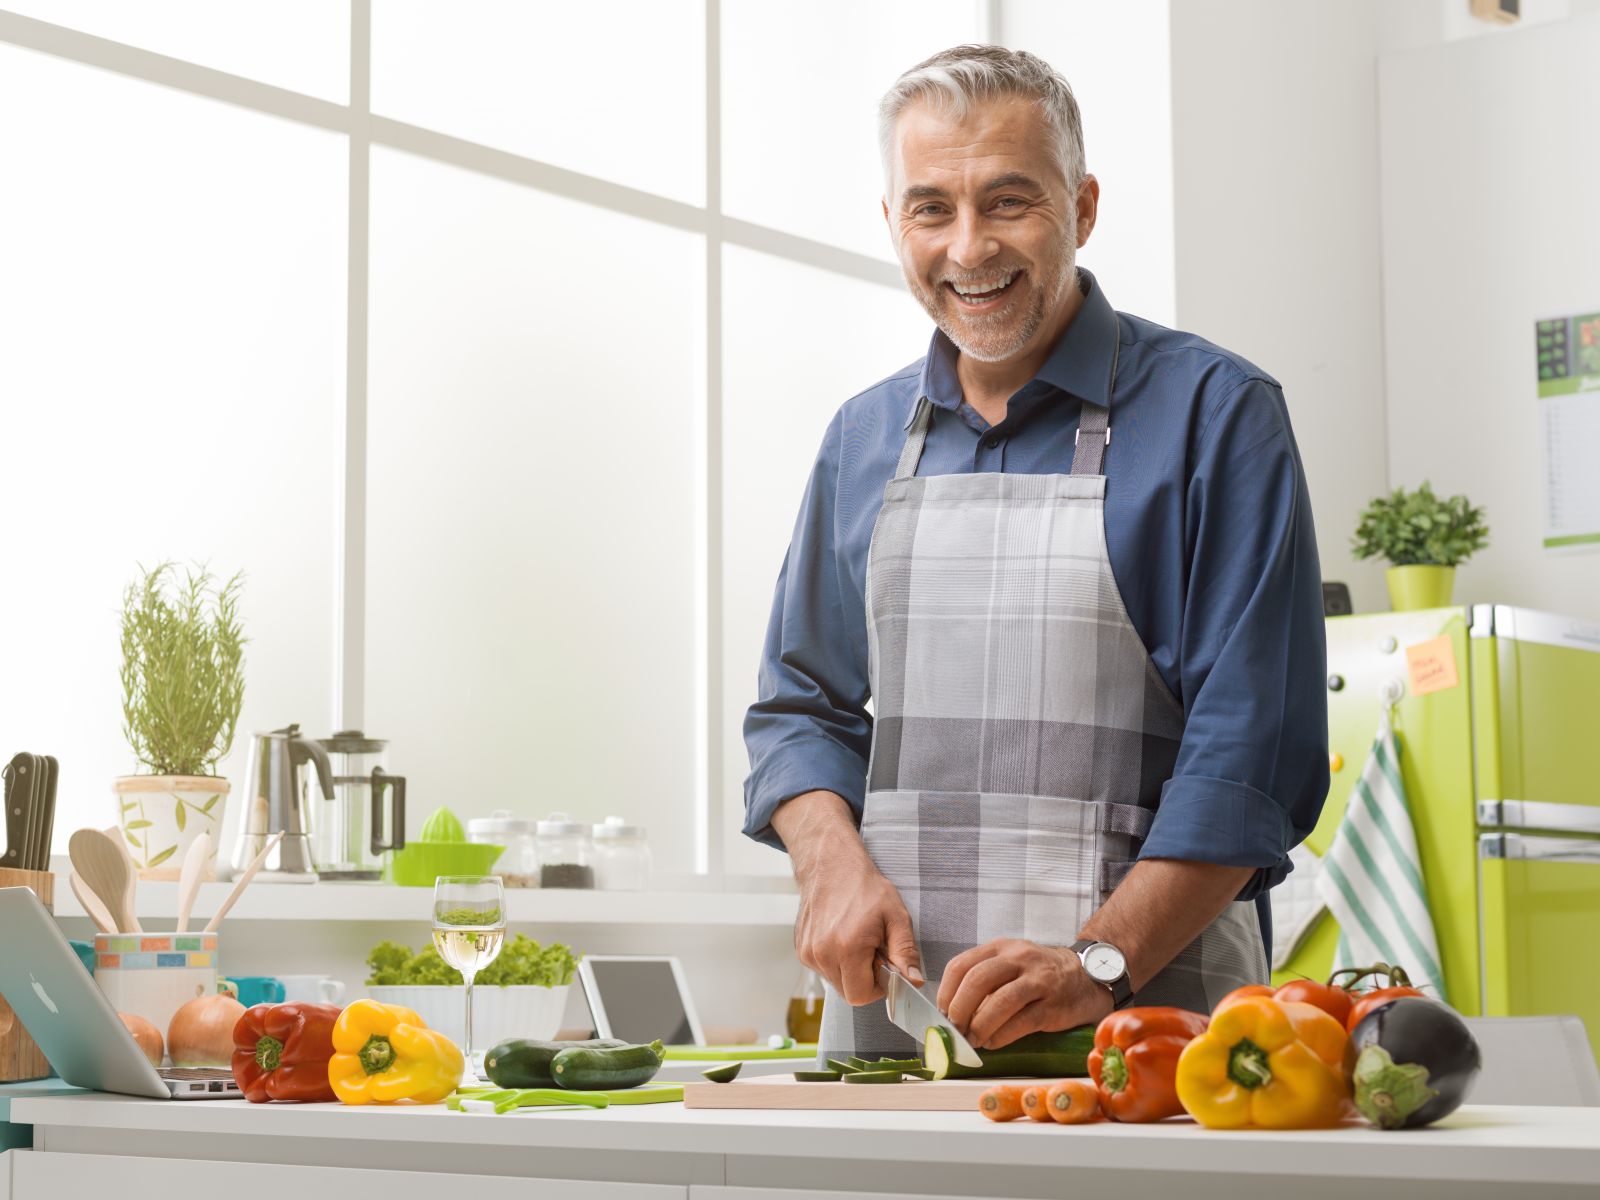 Can diet help fight prostate cancer?